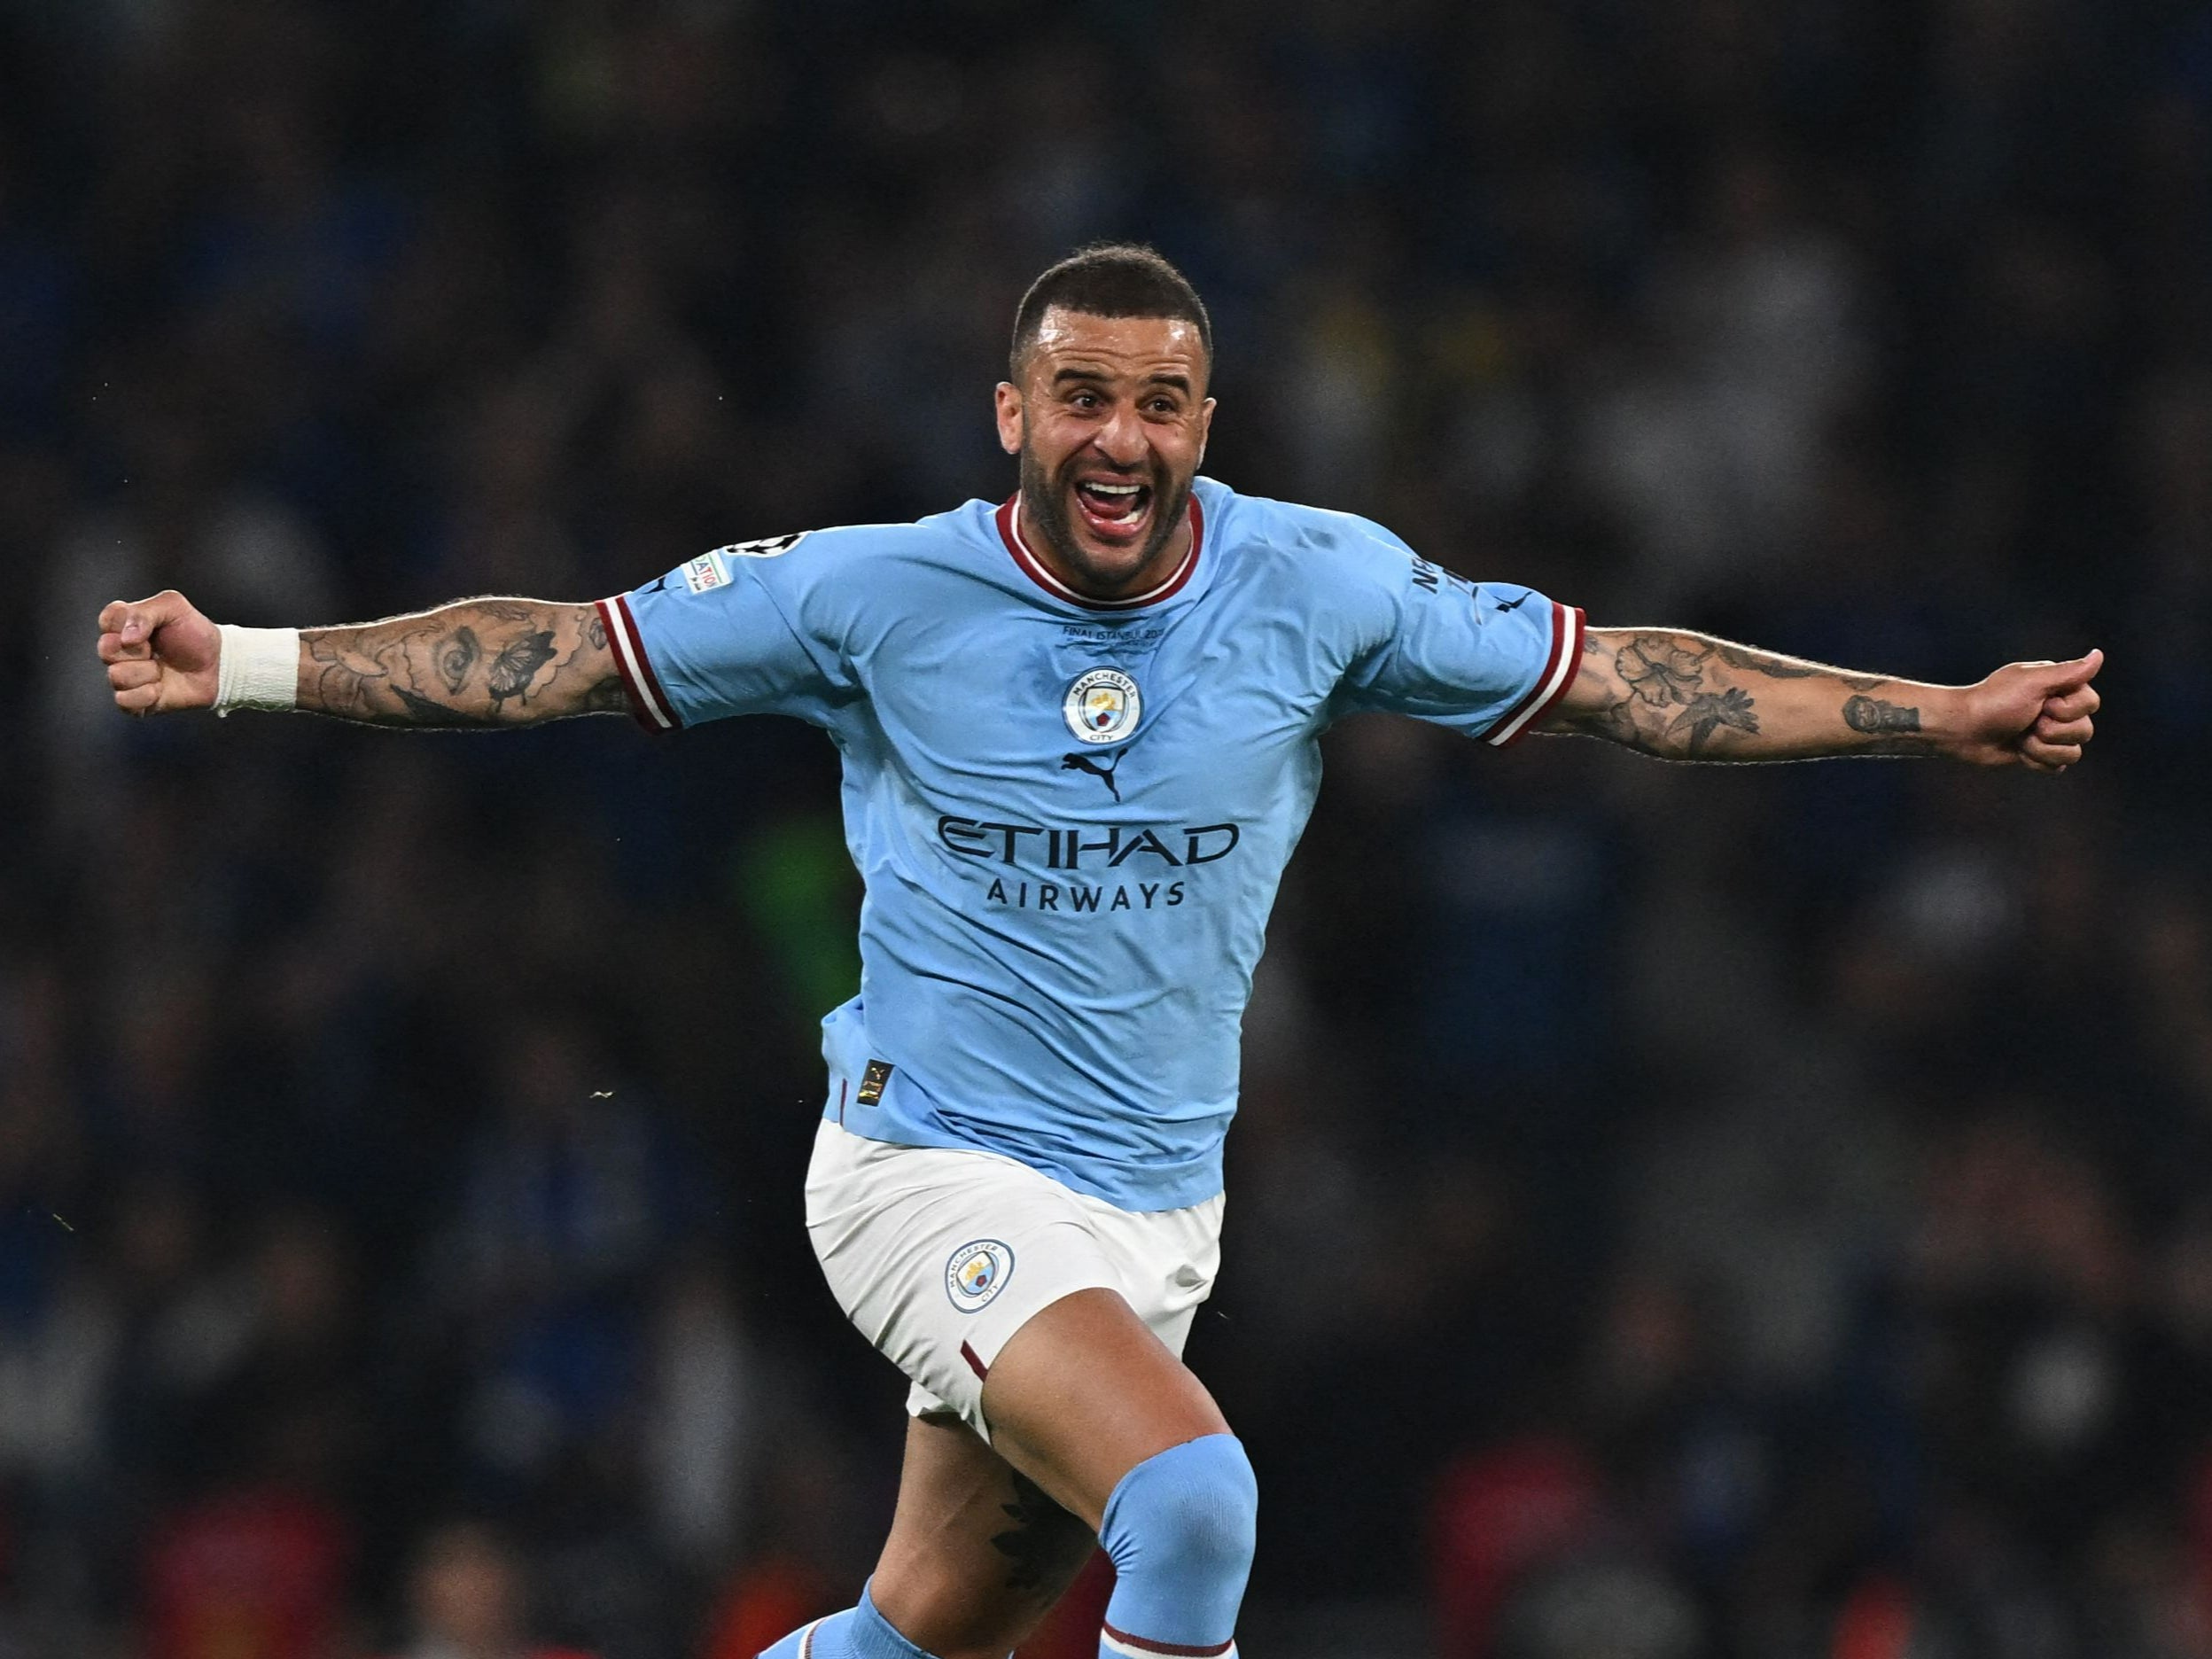 Kyle Walker could celebrate becoming a Champions League winner